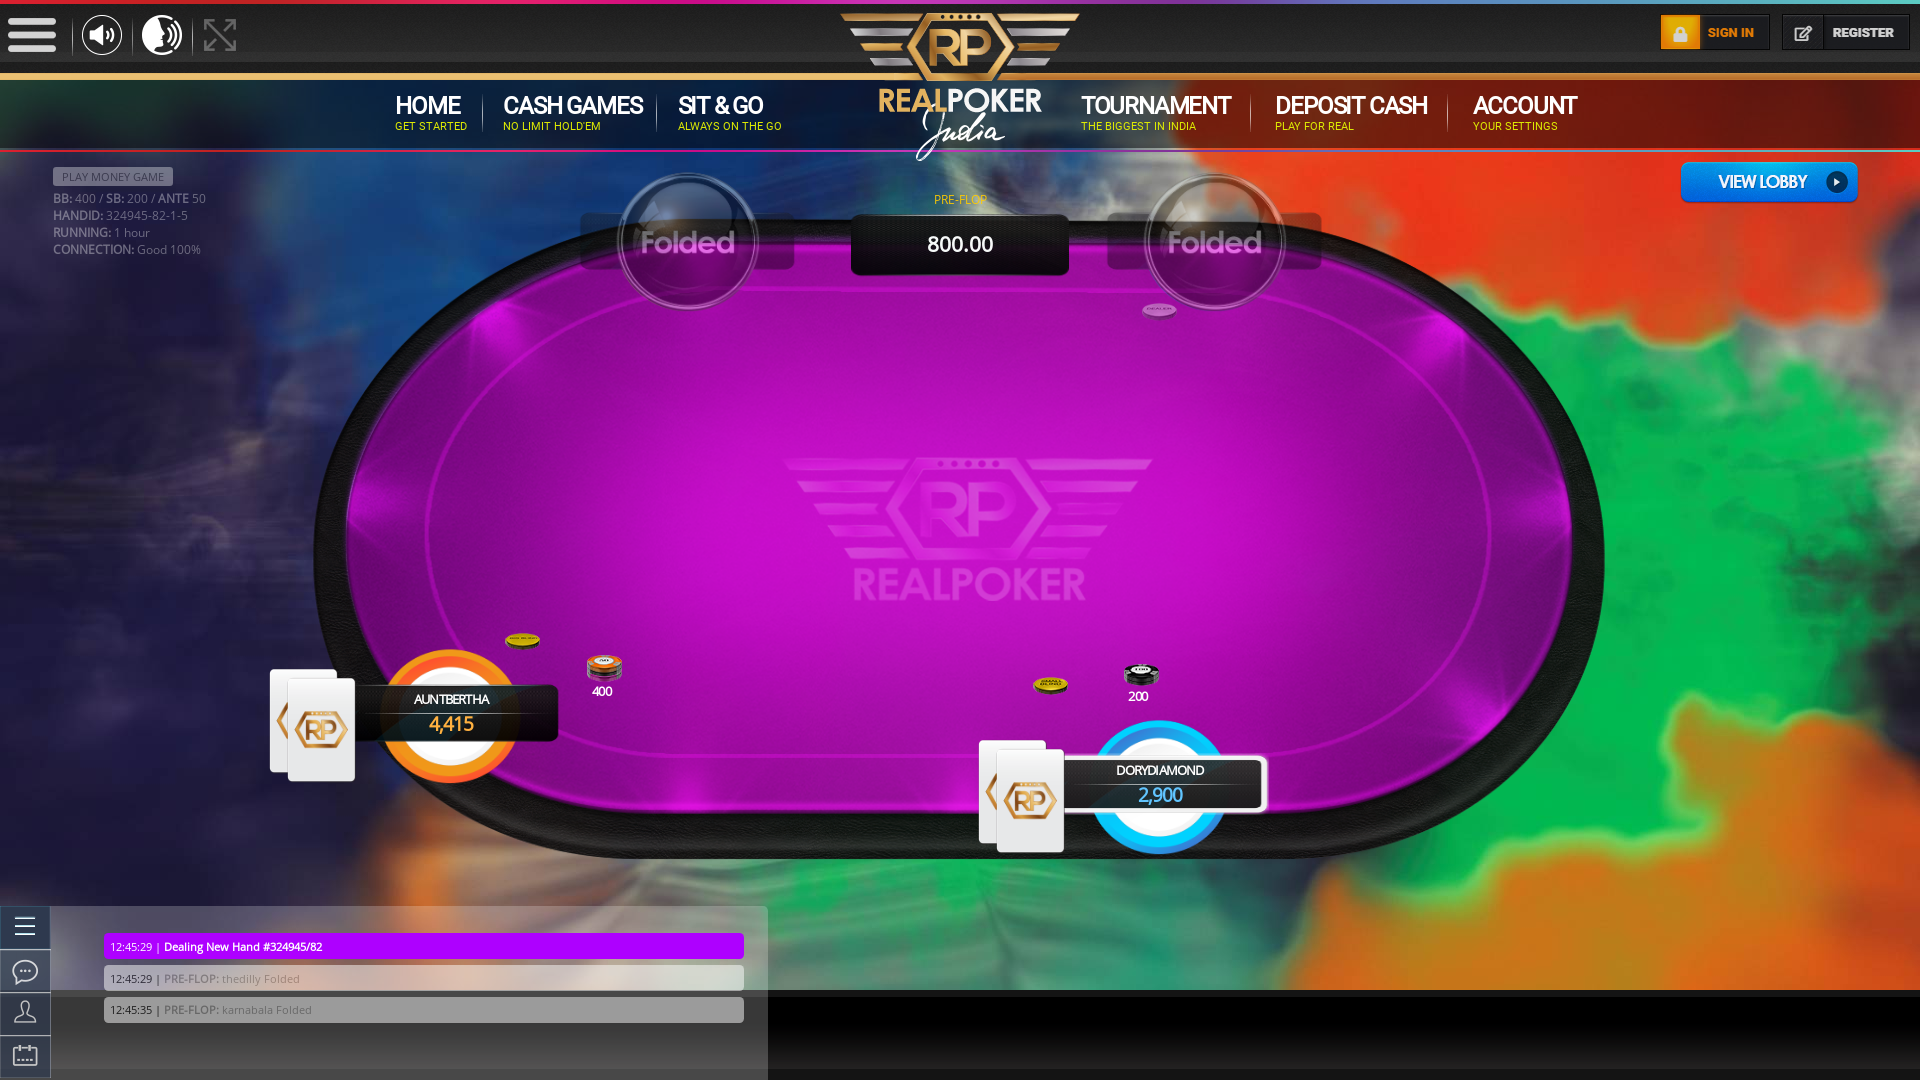 Vasant Nagar, Bangalore texas holdem poker table on a 10 player table in the 64th minute of the game